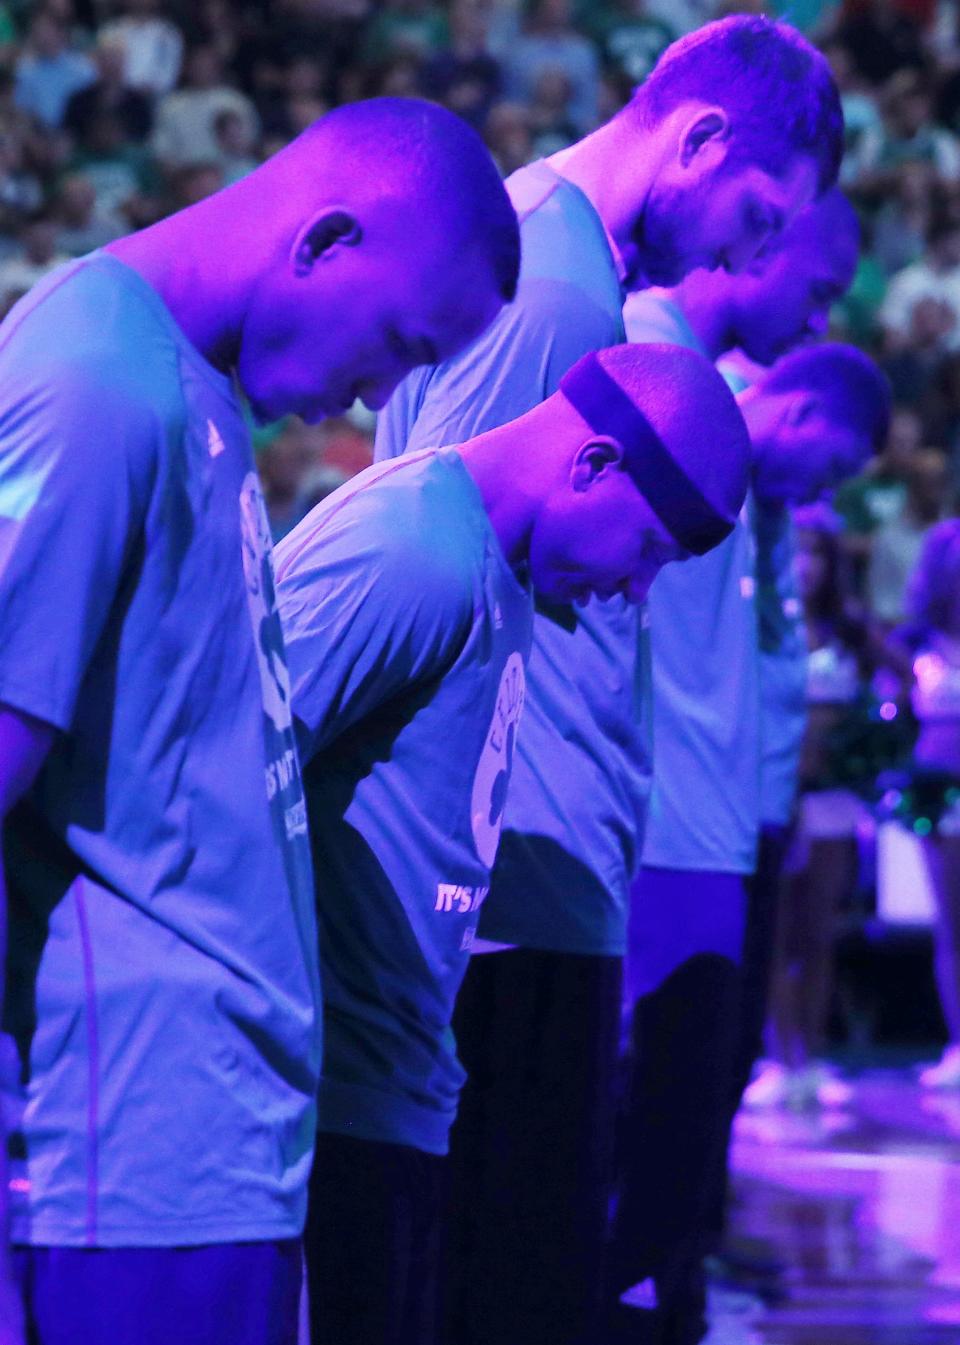 Boston Celtics' Isaiah Thomas, center, and teammates bow their heads during a moment of silence for Thomas' sister Chyna before a first-round NBA playoff basketball game against the Chicago Bulls Sunday, April 16, 2017, in Boston. (AP Photo/Michael Dwyer)